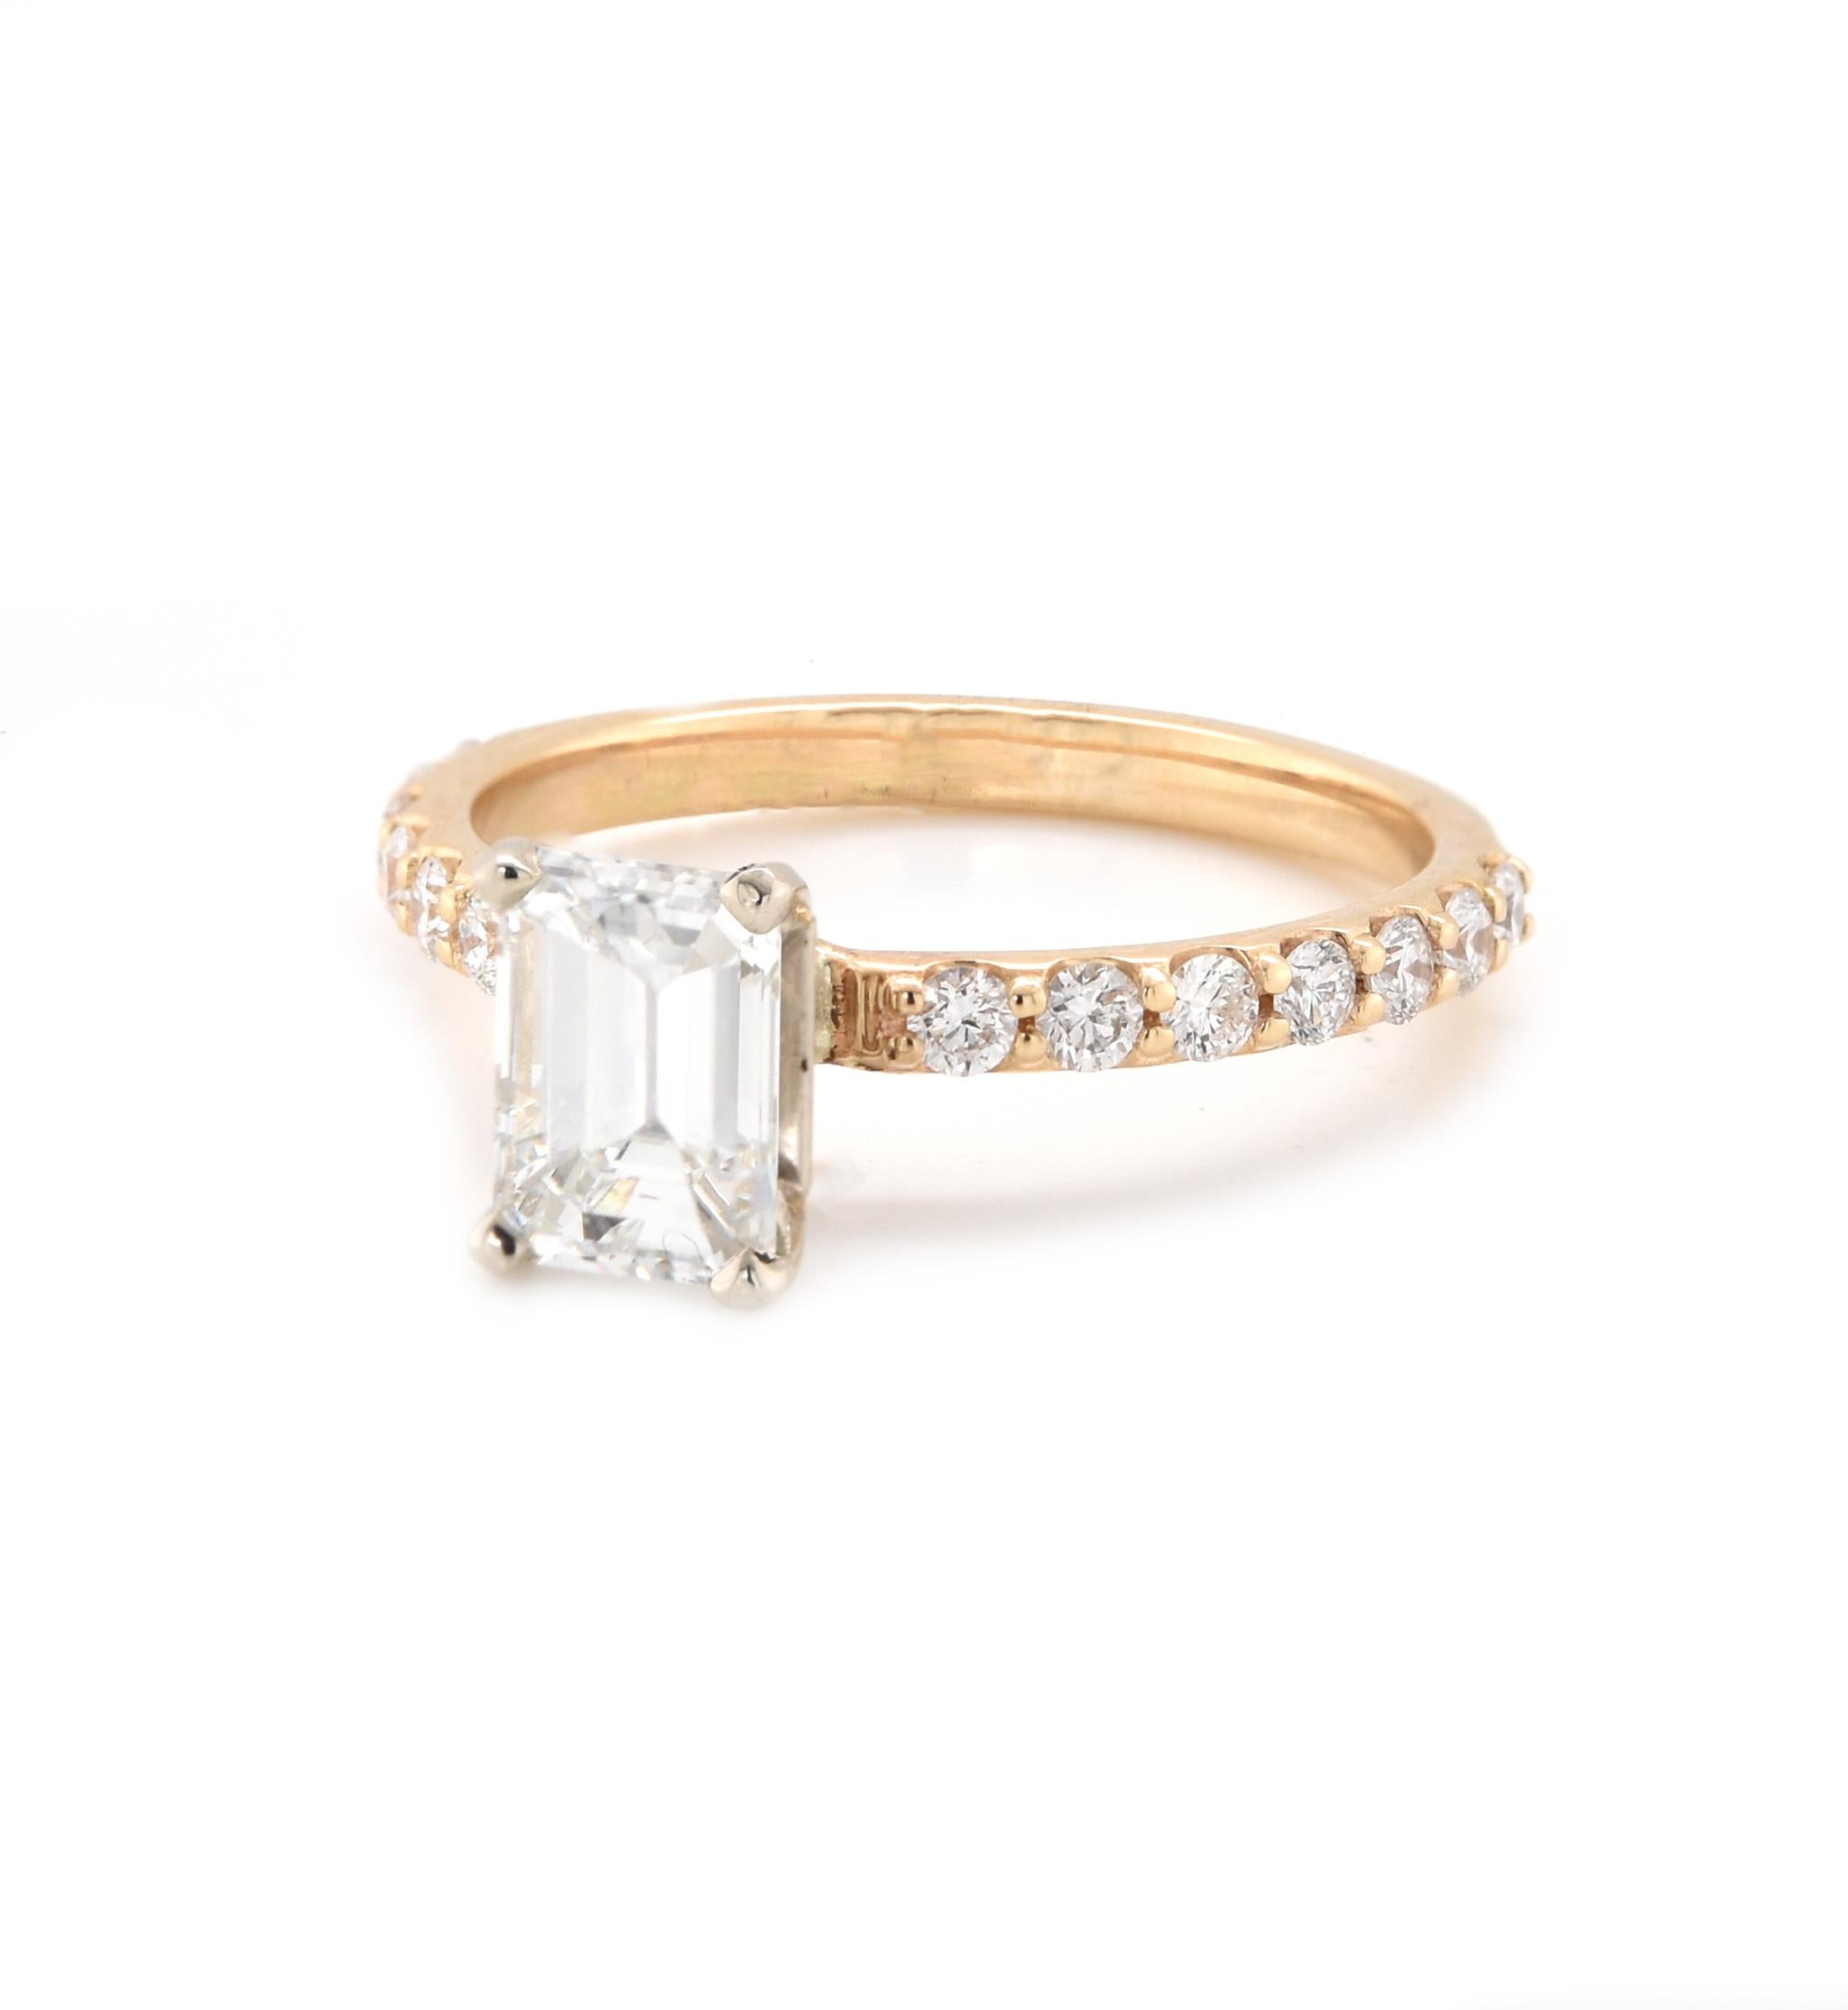 Designer: custom
Material: 14K yellow gold
Diamond: 1 emerald cut = 1.16ct
Color: D
Clarity: VVS2
GIA: 2135110778
Diamonds: 14 round brilliant cut = .42cttw
Color: G
Clarity: VS2
Ring Size: 7 (please allow up to 2 additional business days for sizing